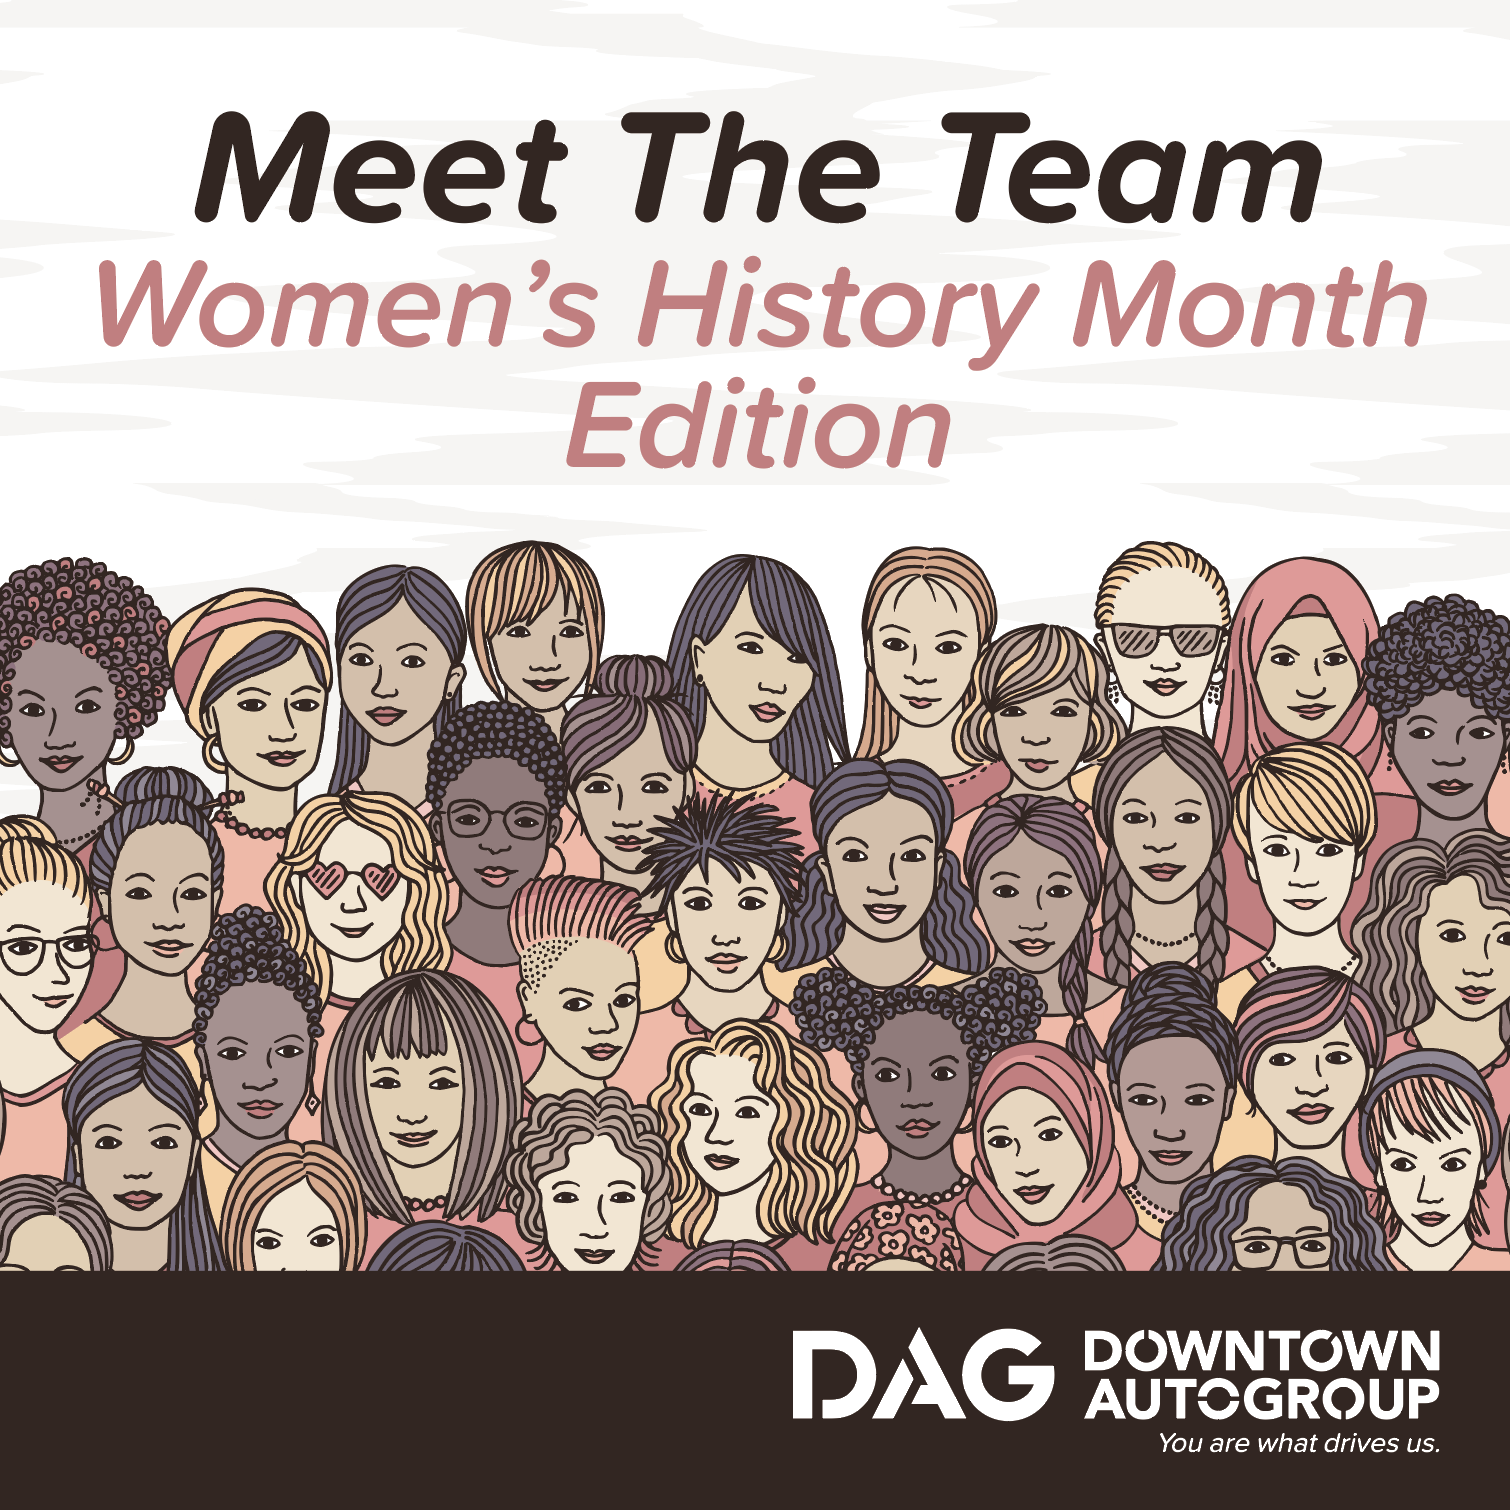 Meet the Team | Women's History Month Edition